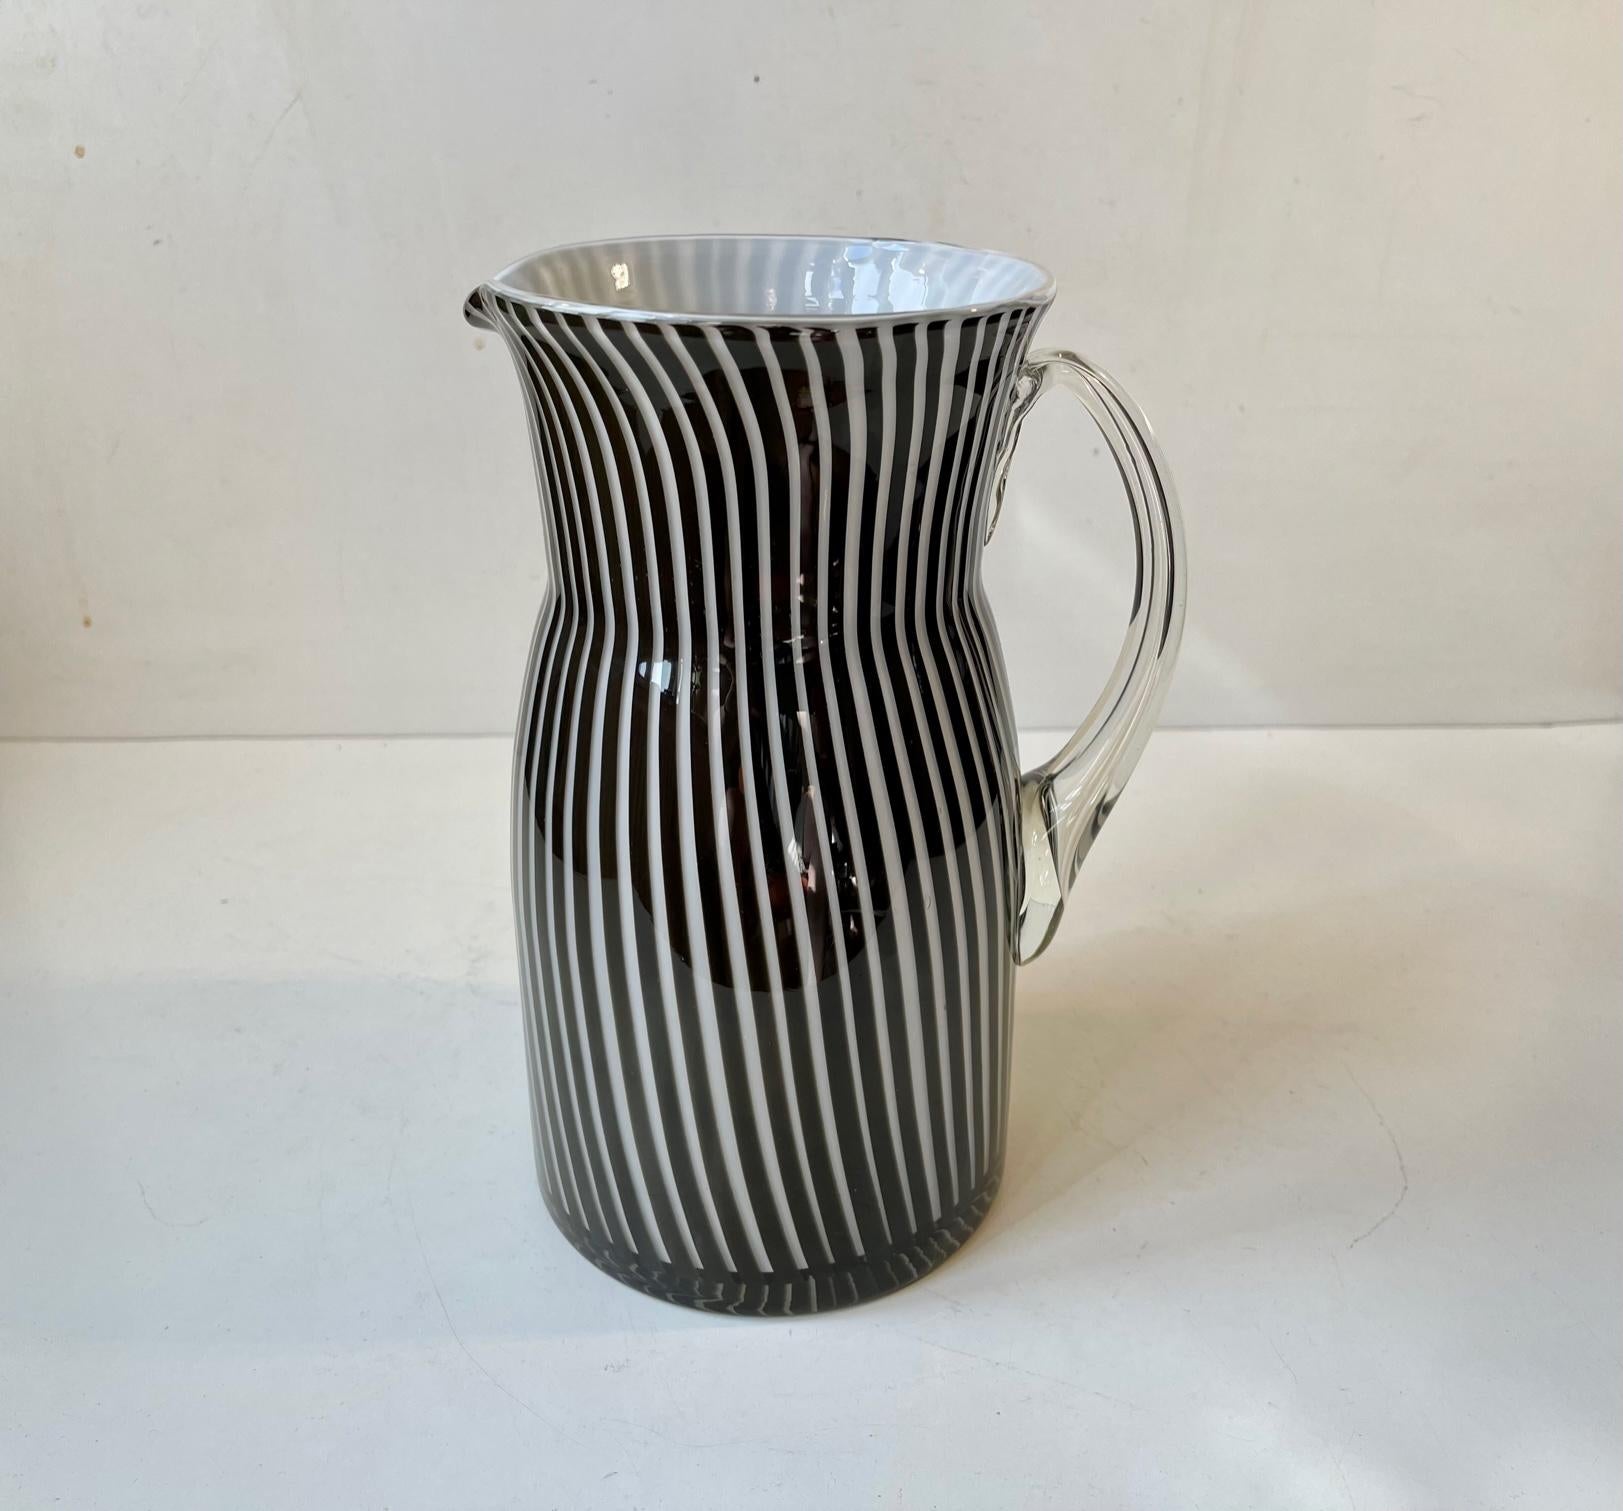 Late 20th Century Handblown Black and White Striped Glass Pitcher from Murano, 1980s